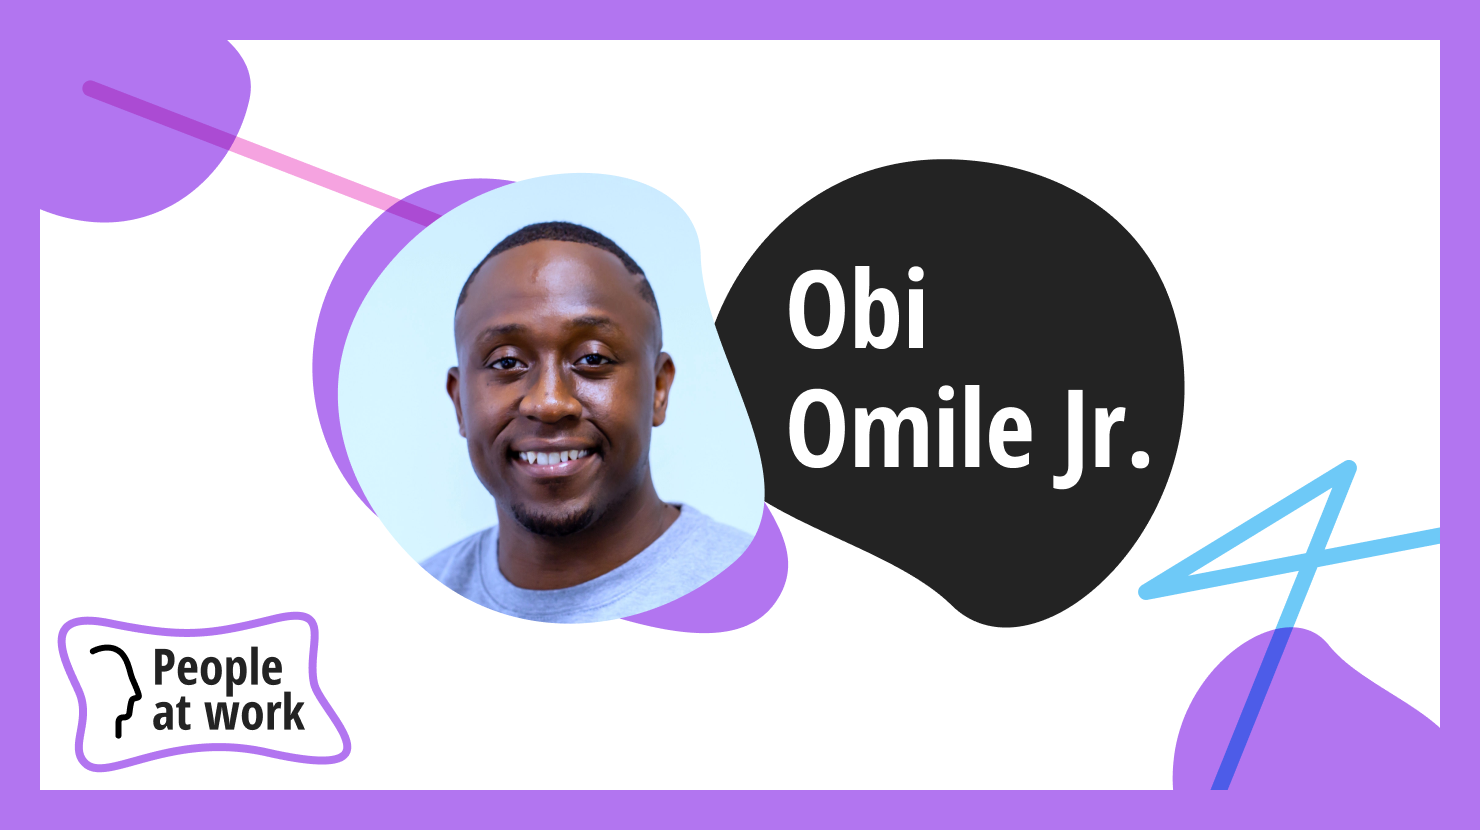 The importance of community with Obi Omile Jr.